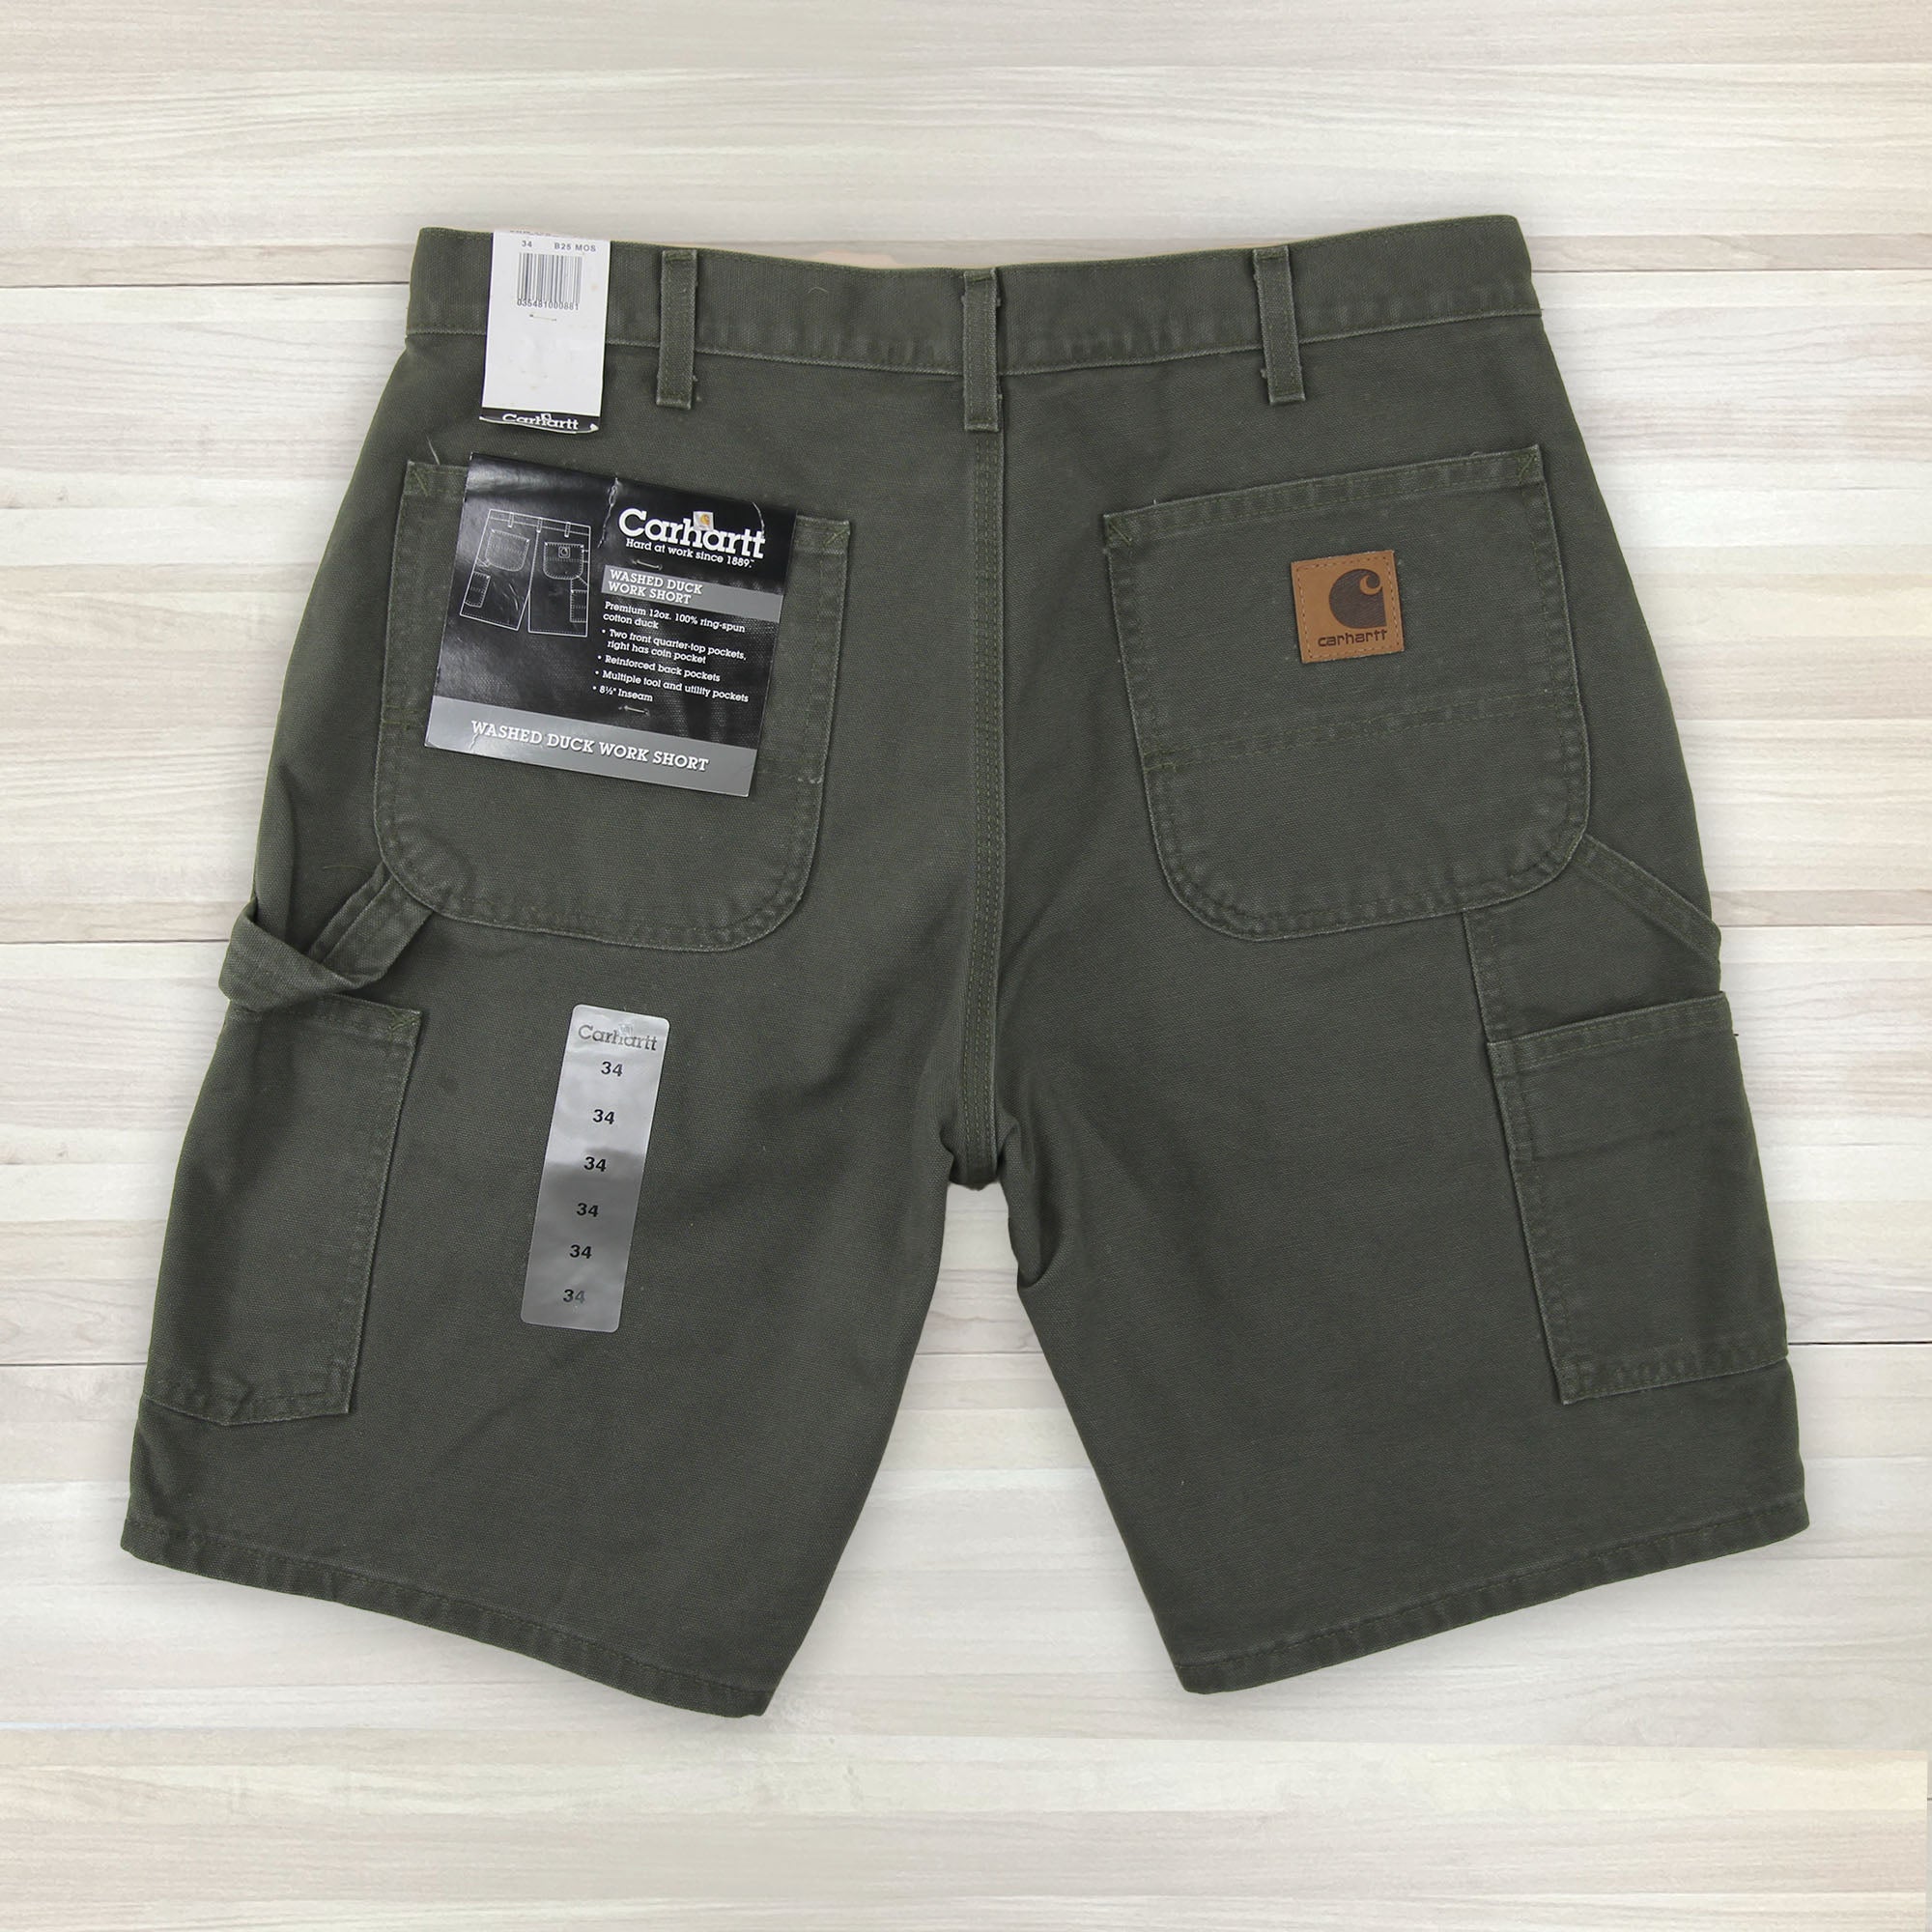 Men's Vintage Carhartt B25 Moss Washed Duck Shorts NWT 34x8.5 - 0